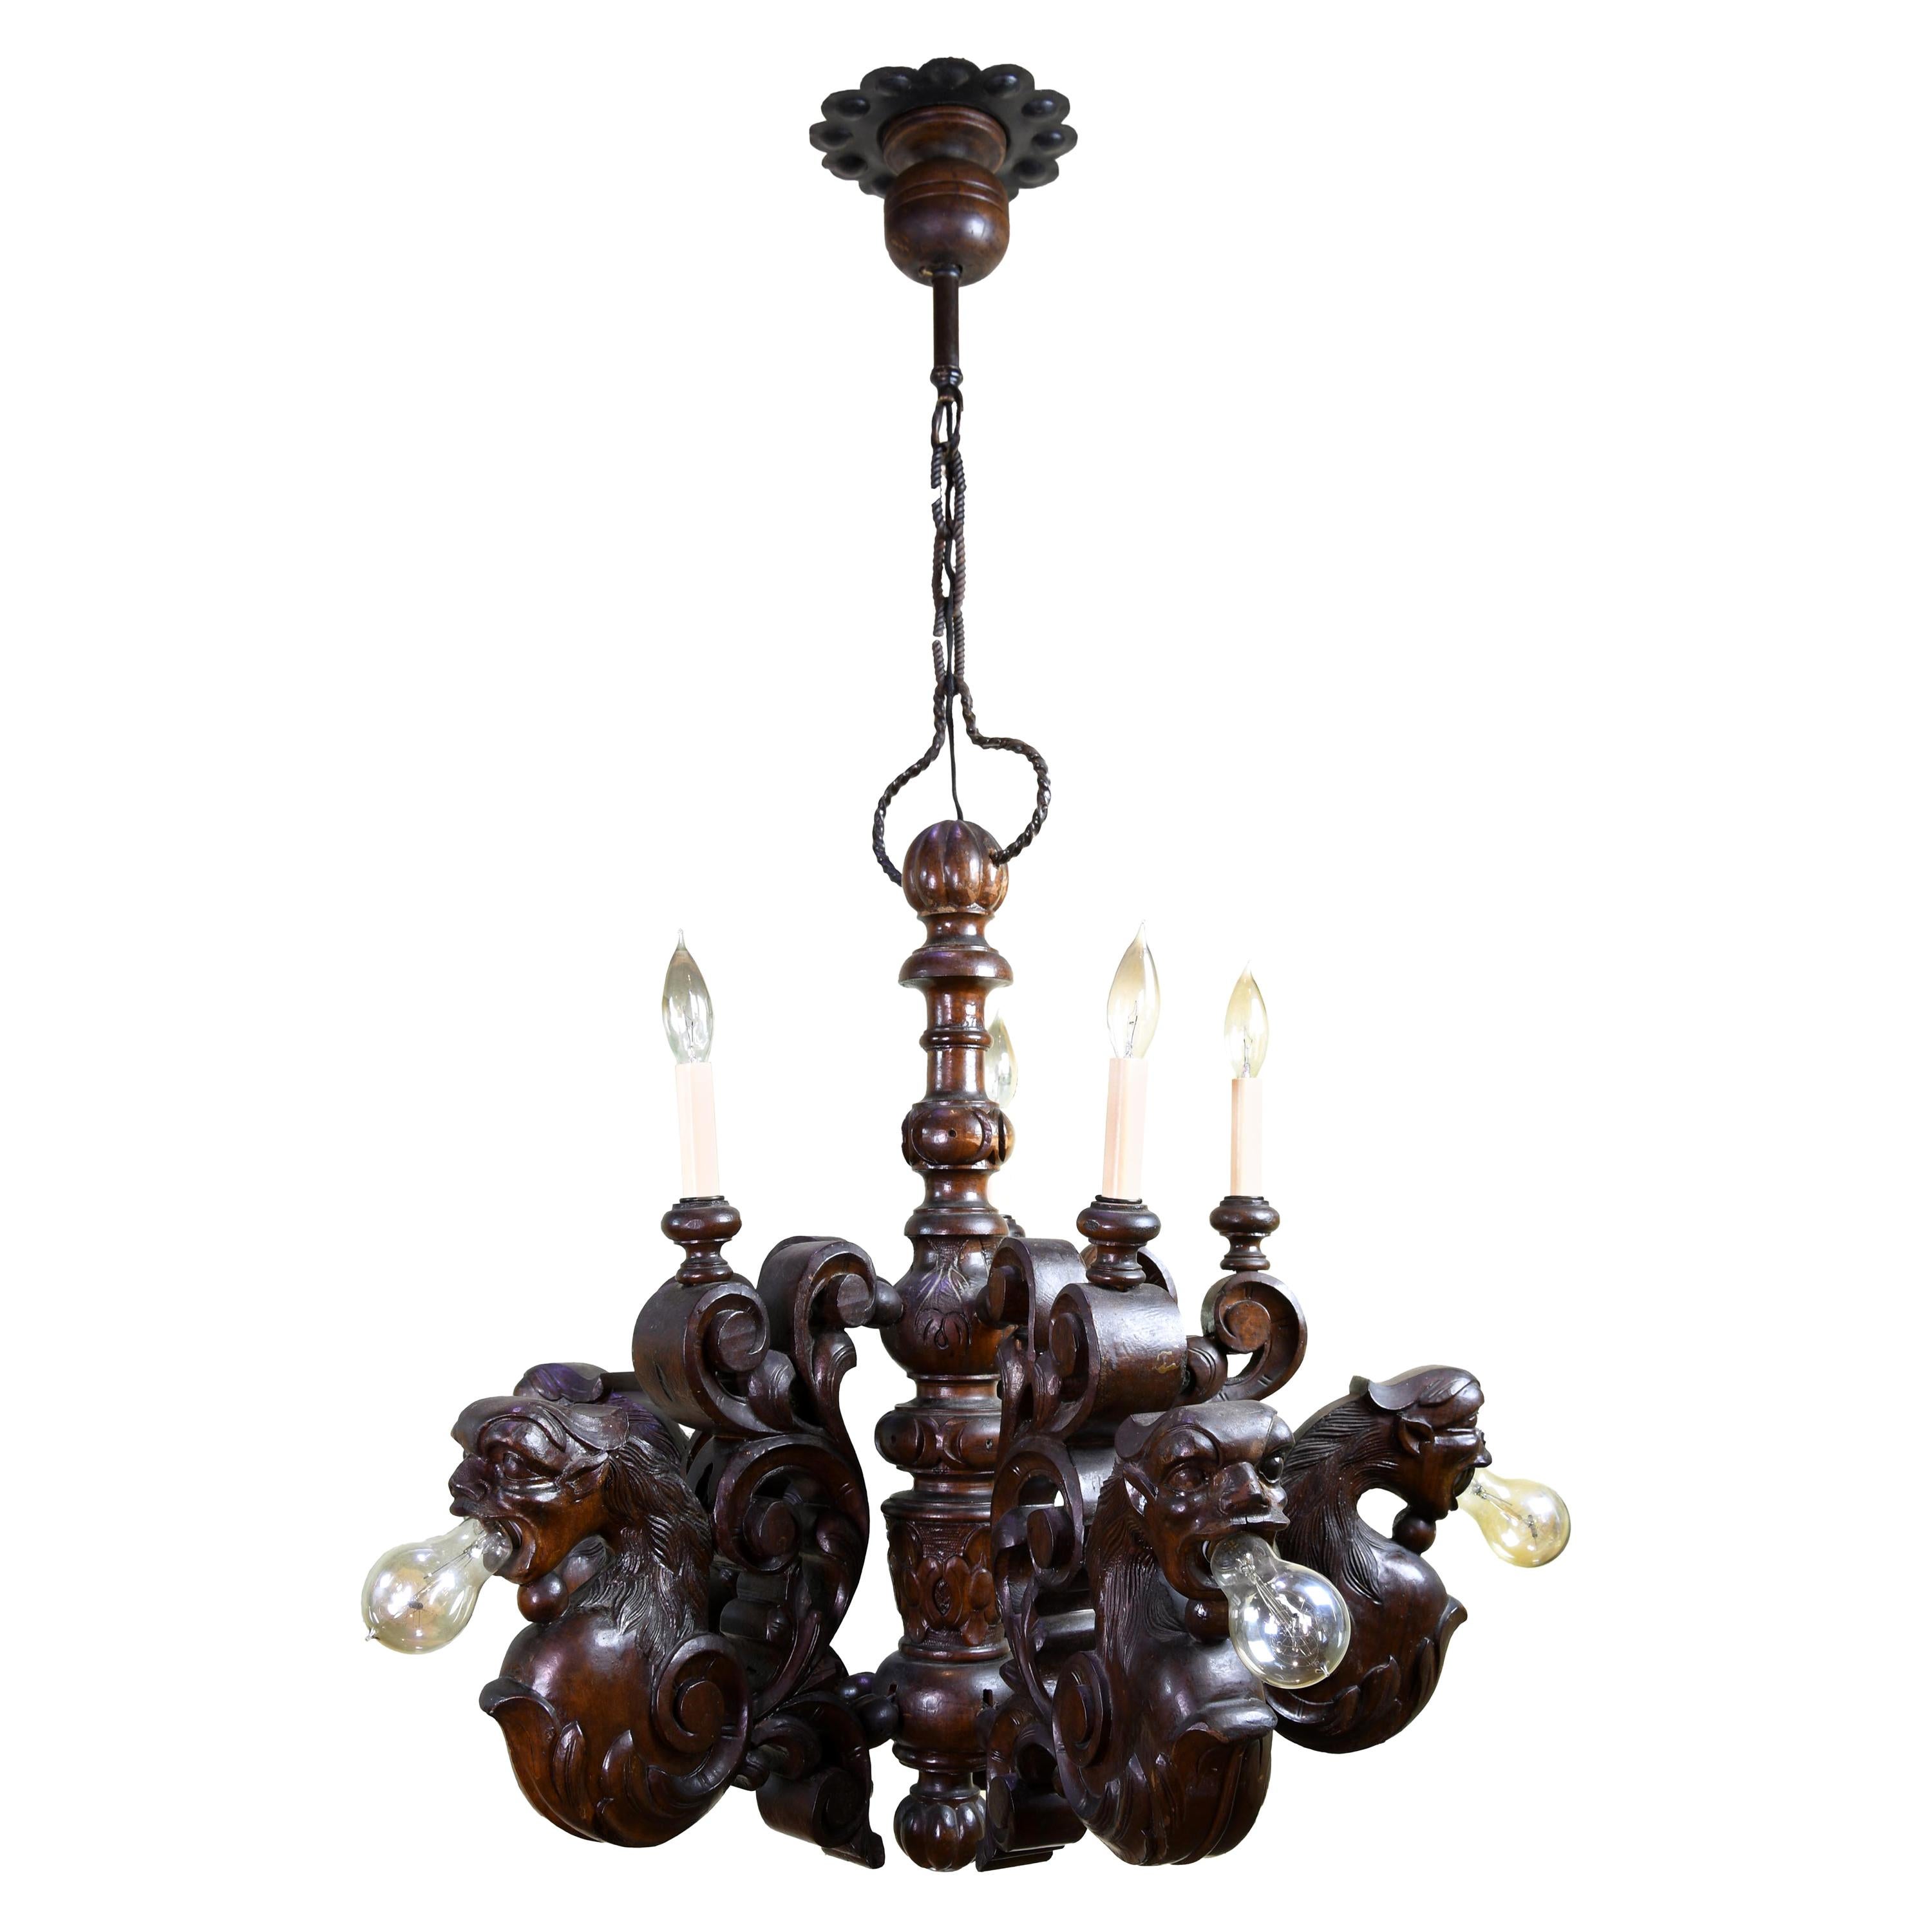 Early Electric Eleven Light Carved Wood Dragon Chandelier